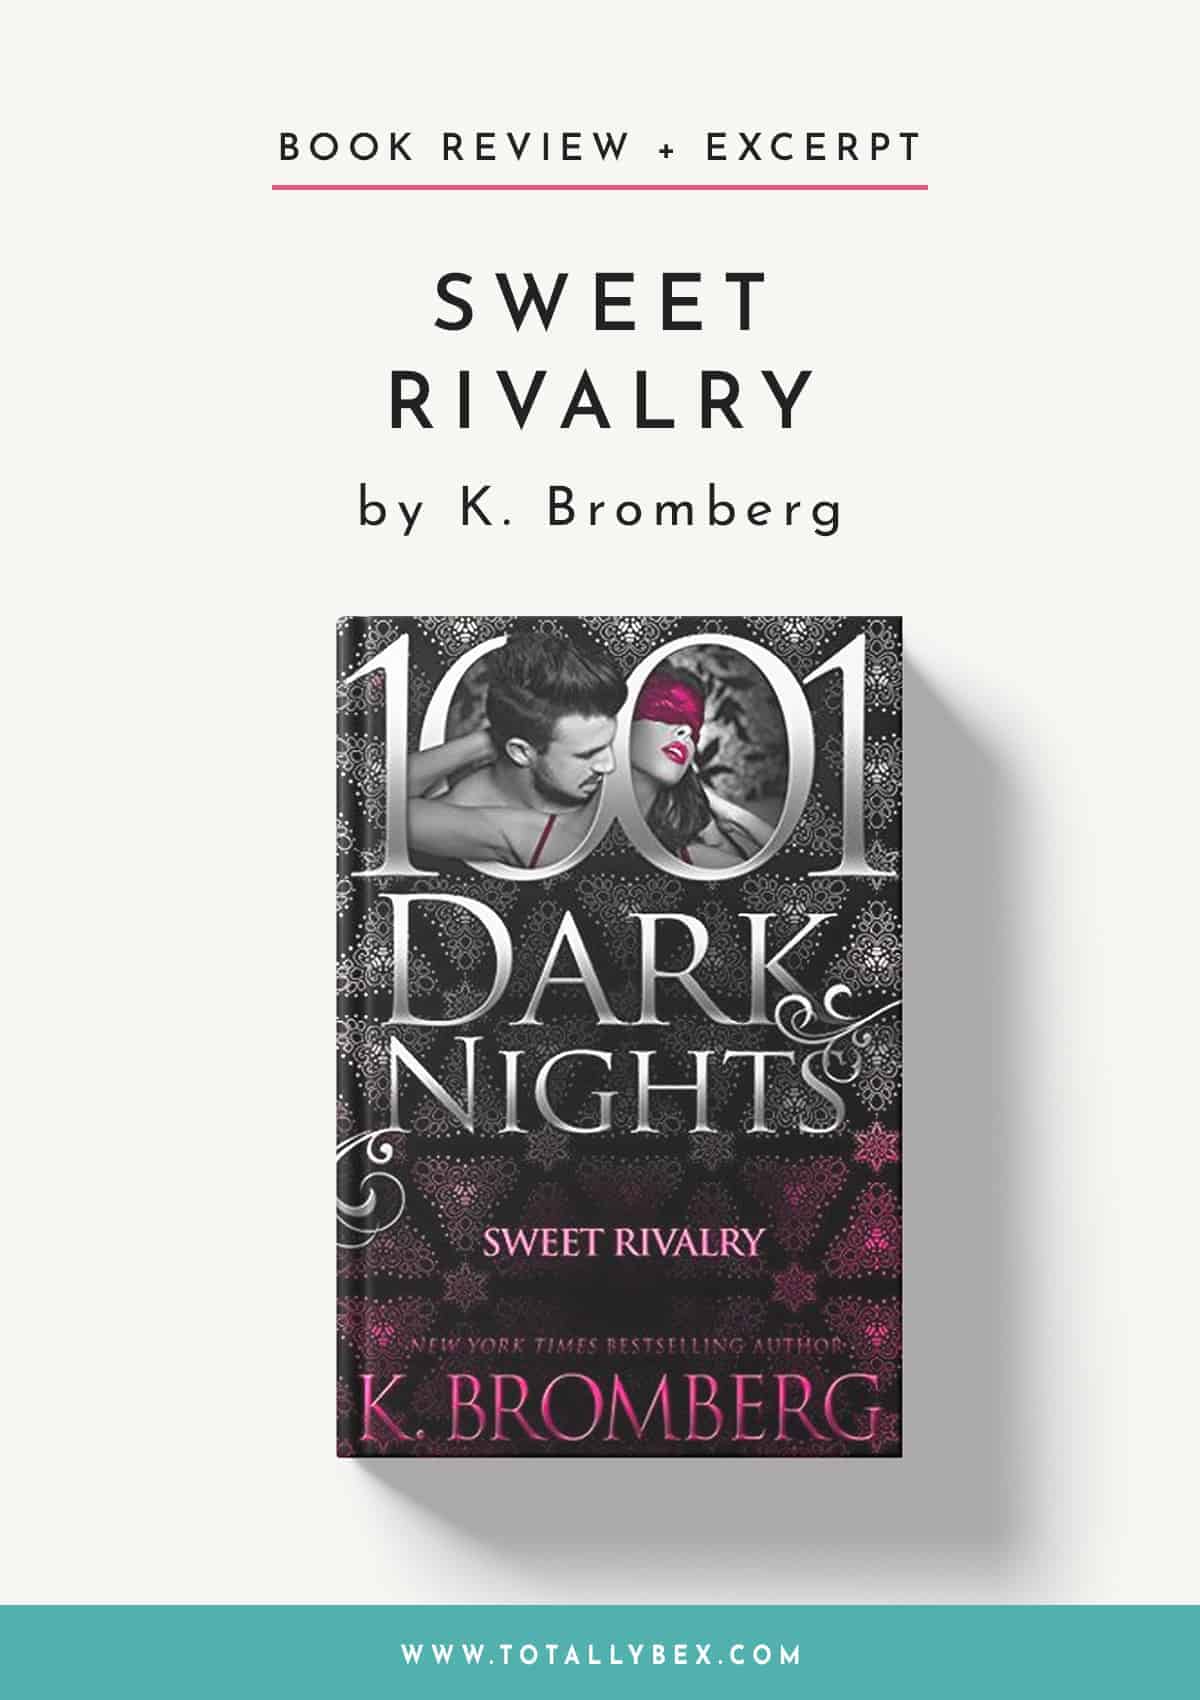 Sweet Rivalry by K. Bromberg – My Review and an Excerpt